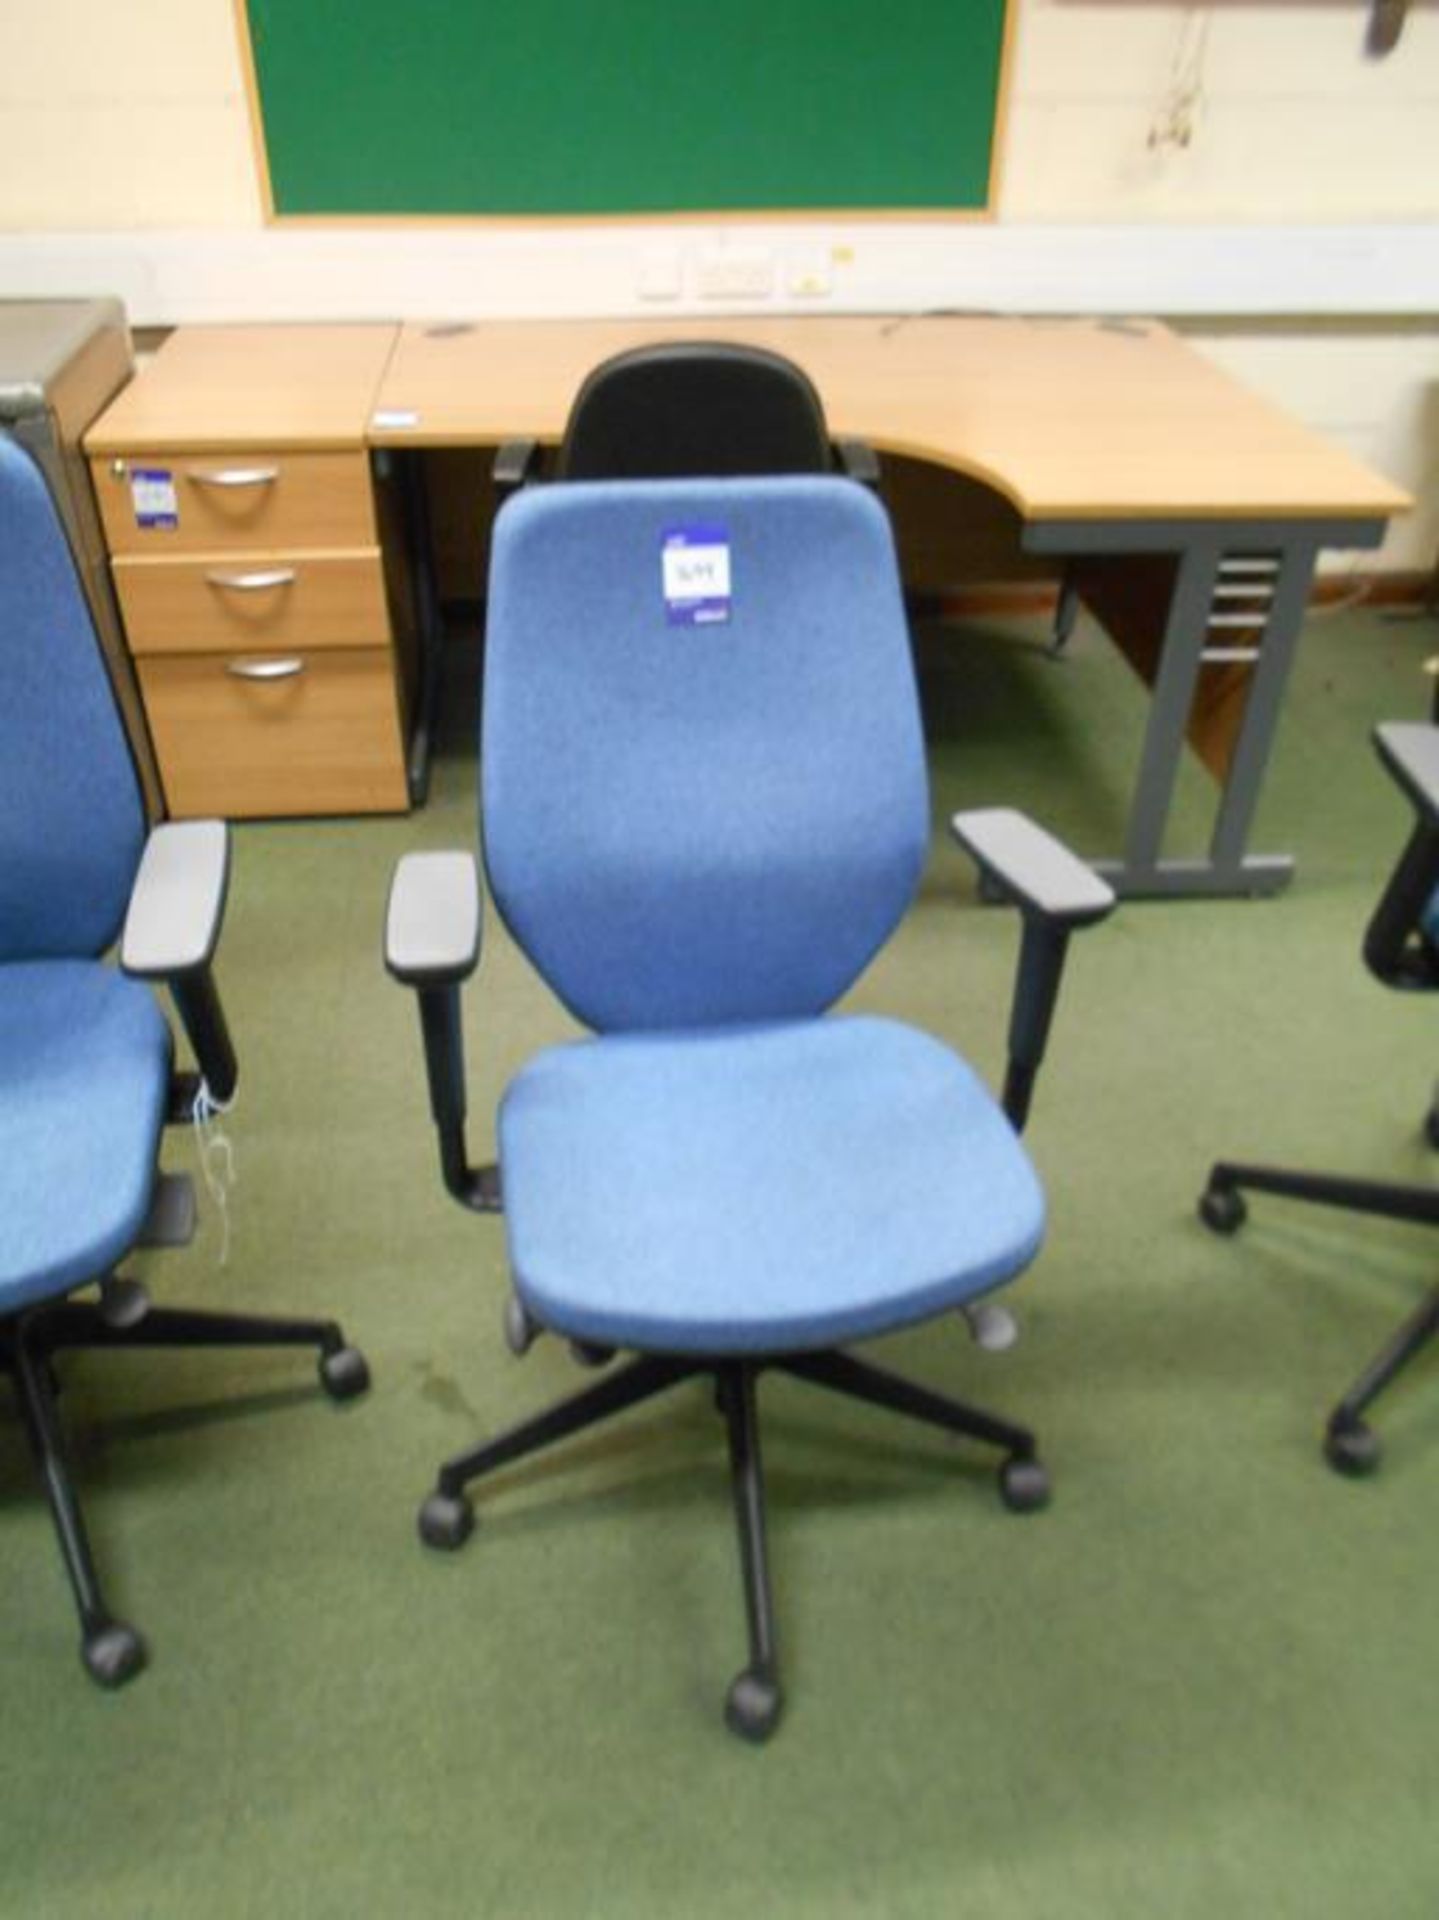 * Orangebox JOY-OHA Mobile Upholstered Office Chair Photographs are provided for example purposes - Image 2 of 2